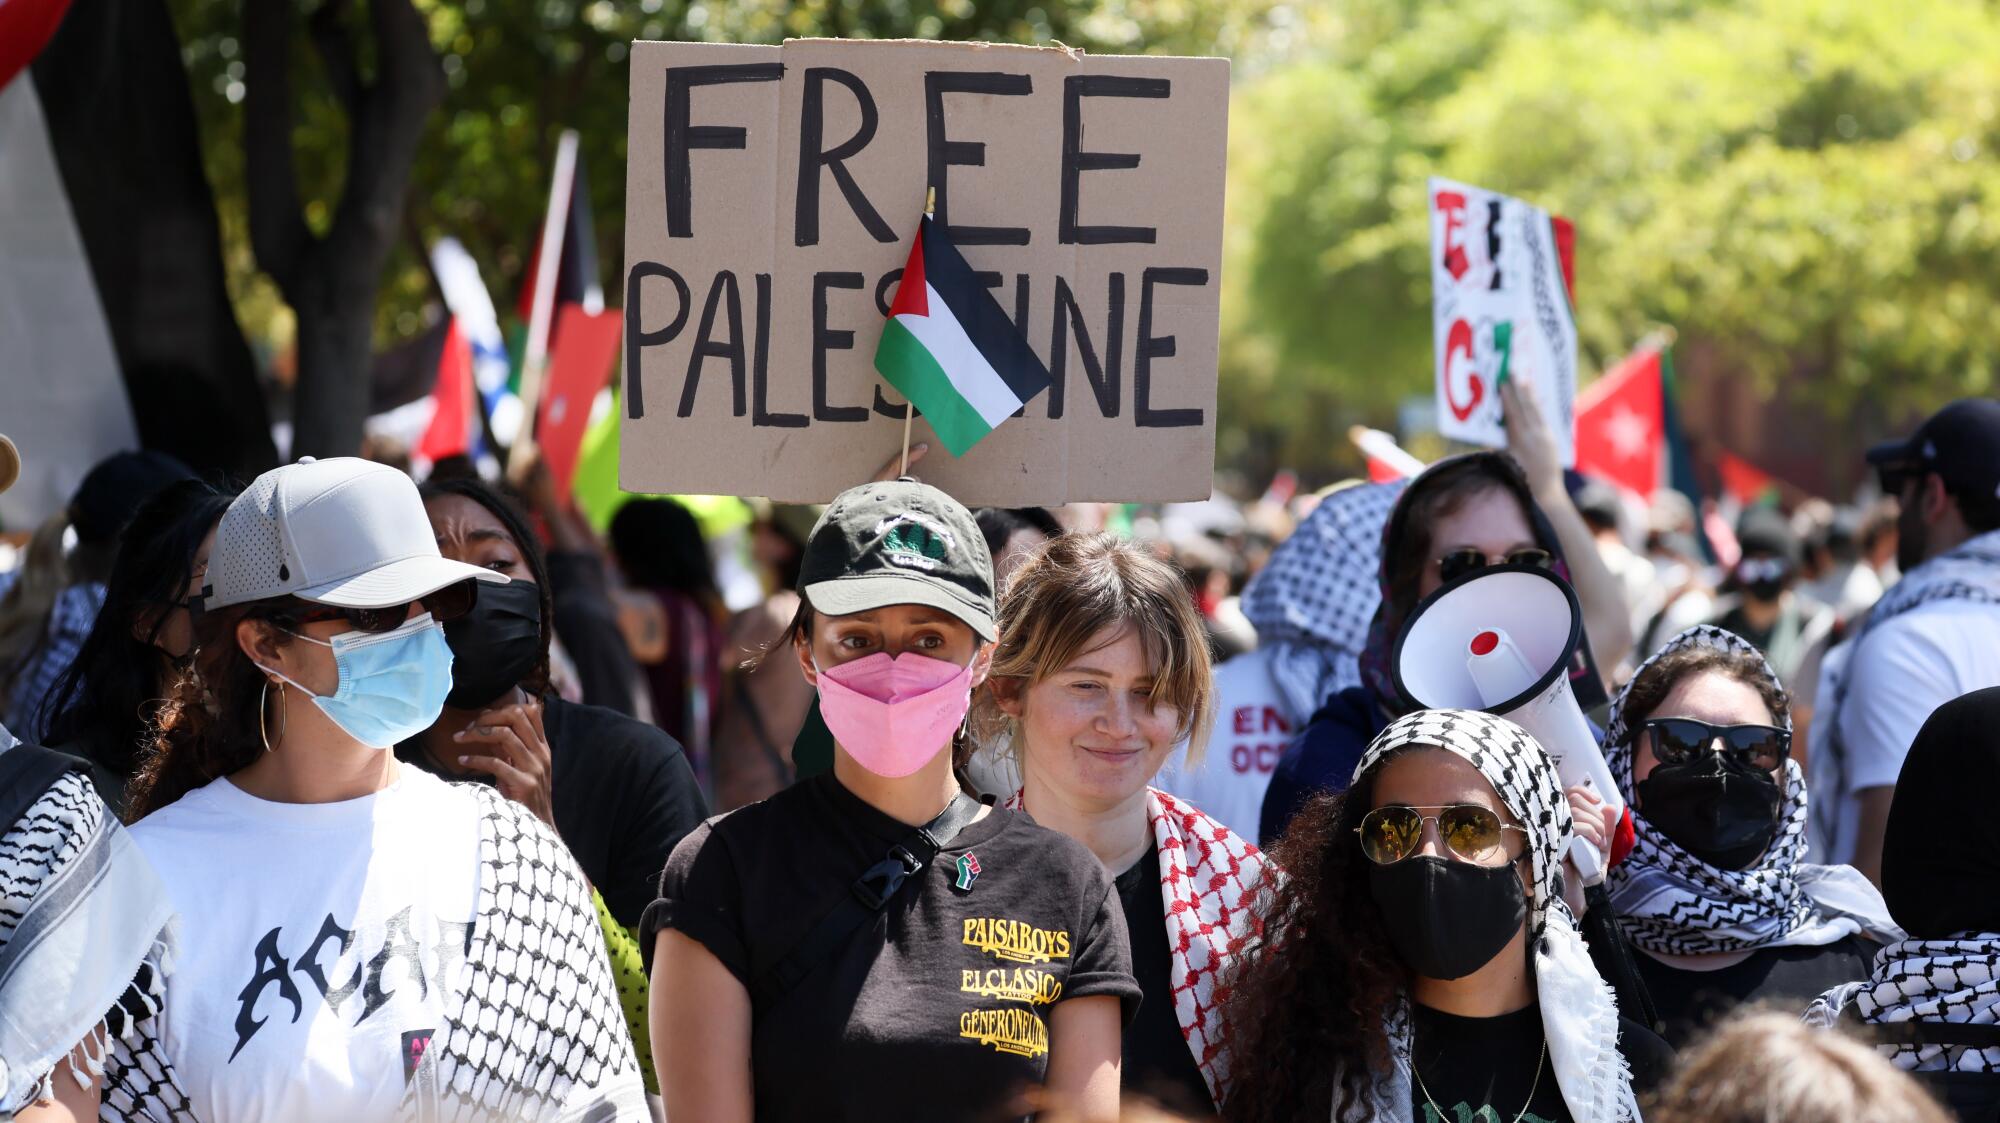 Pro-Palestinian protesters marching at UCLA